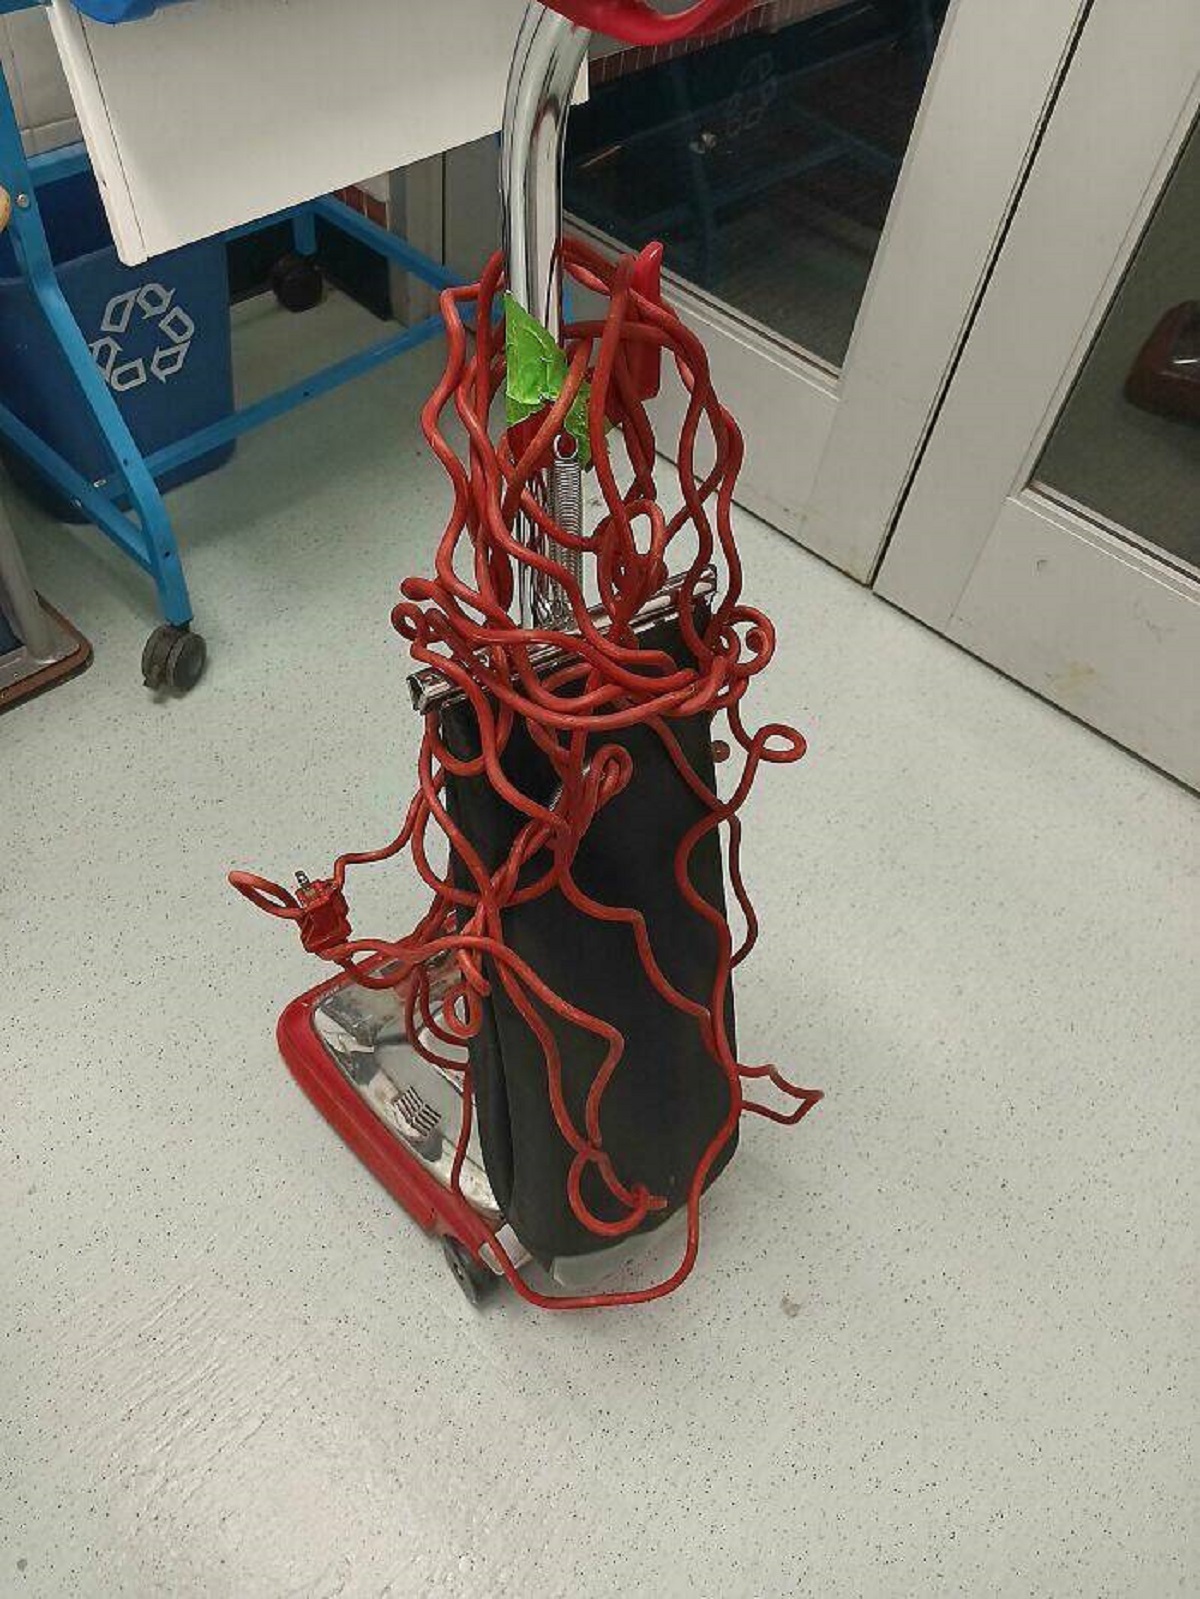 "How My Coworkers Leave The Vacuum Cord"